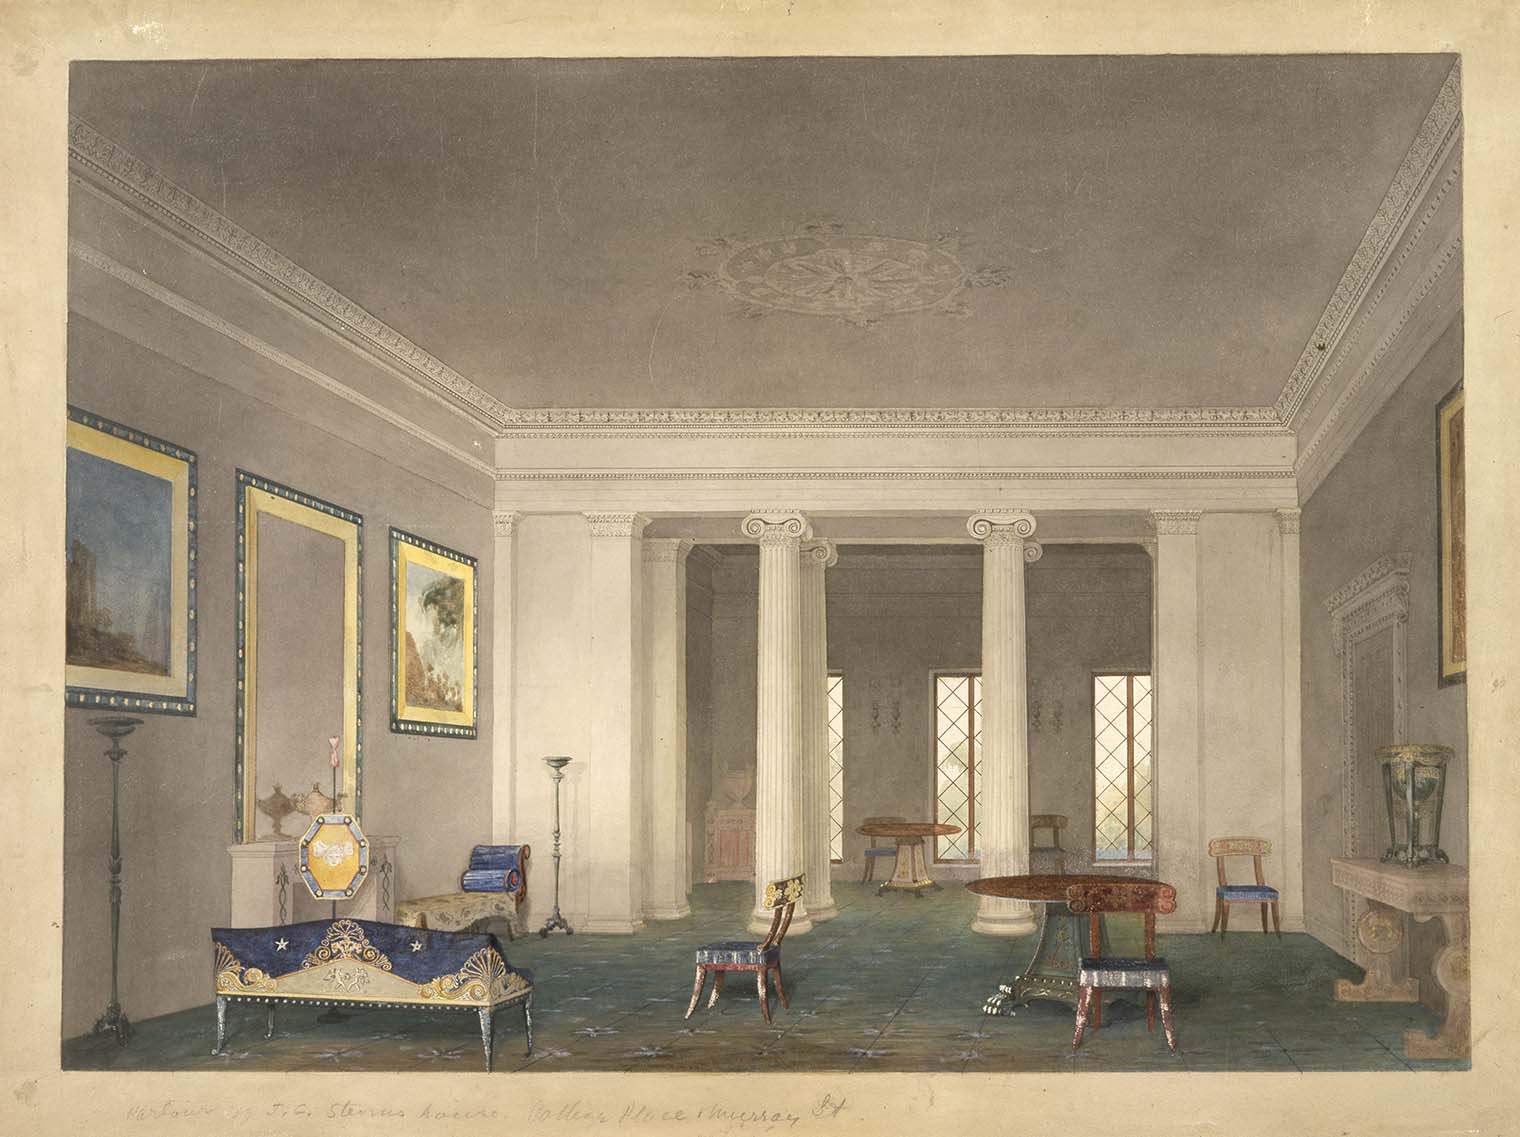 A watercolor painting of a double parlor in New York City by Alexander Jackson Davis. From the collection of the New York Historical Society.